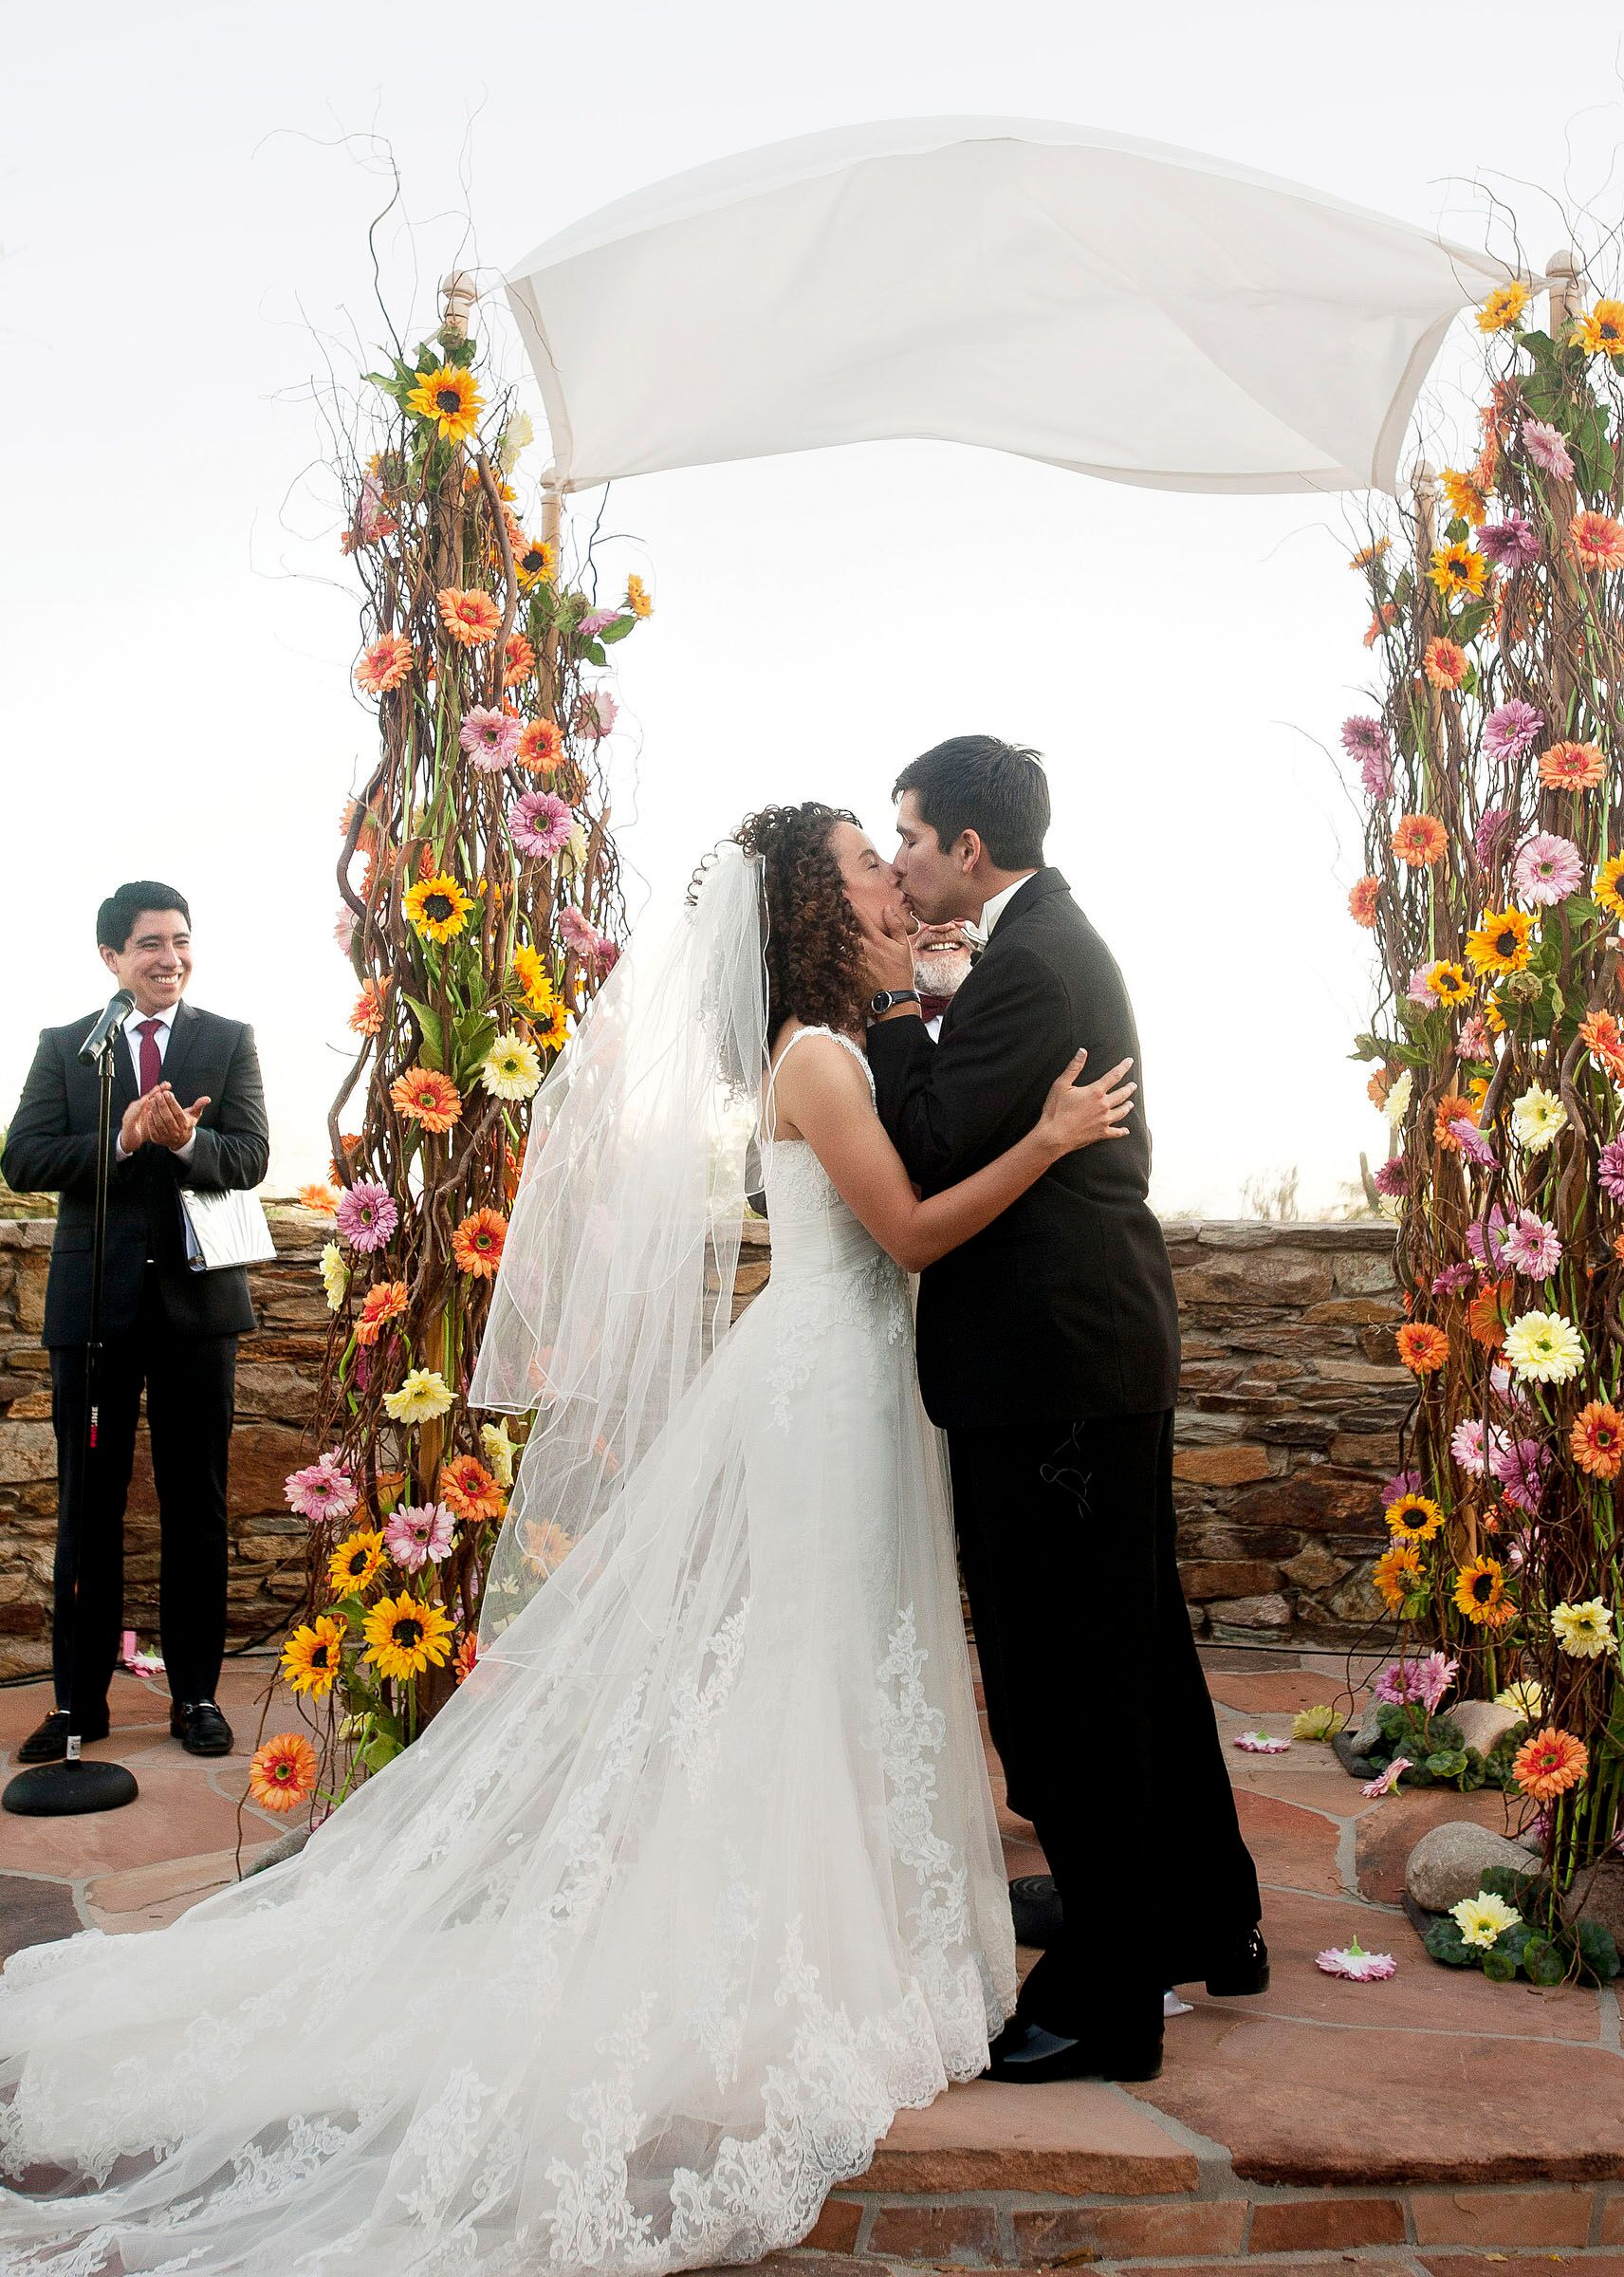 Mexican and Jewish Wedding Ceremony Traditions in Arizona